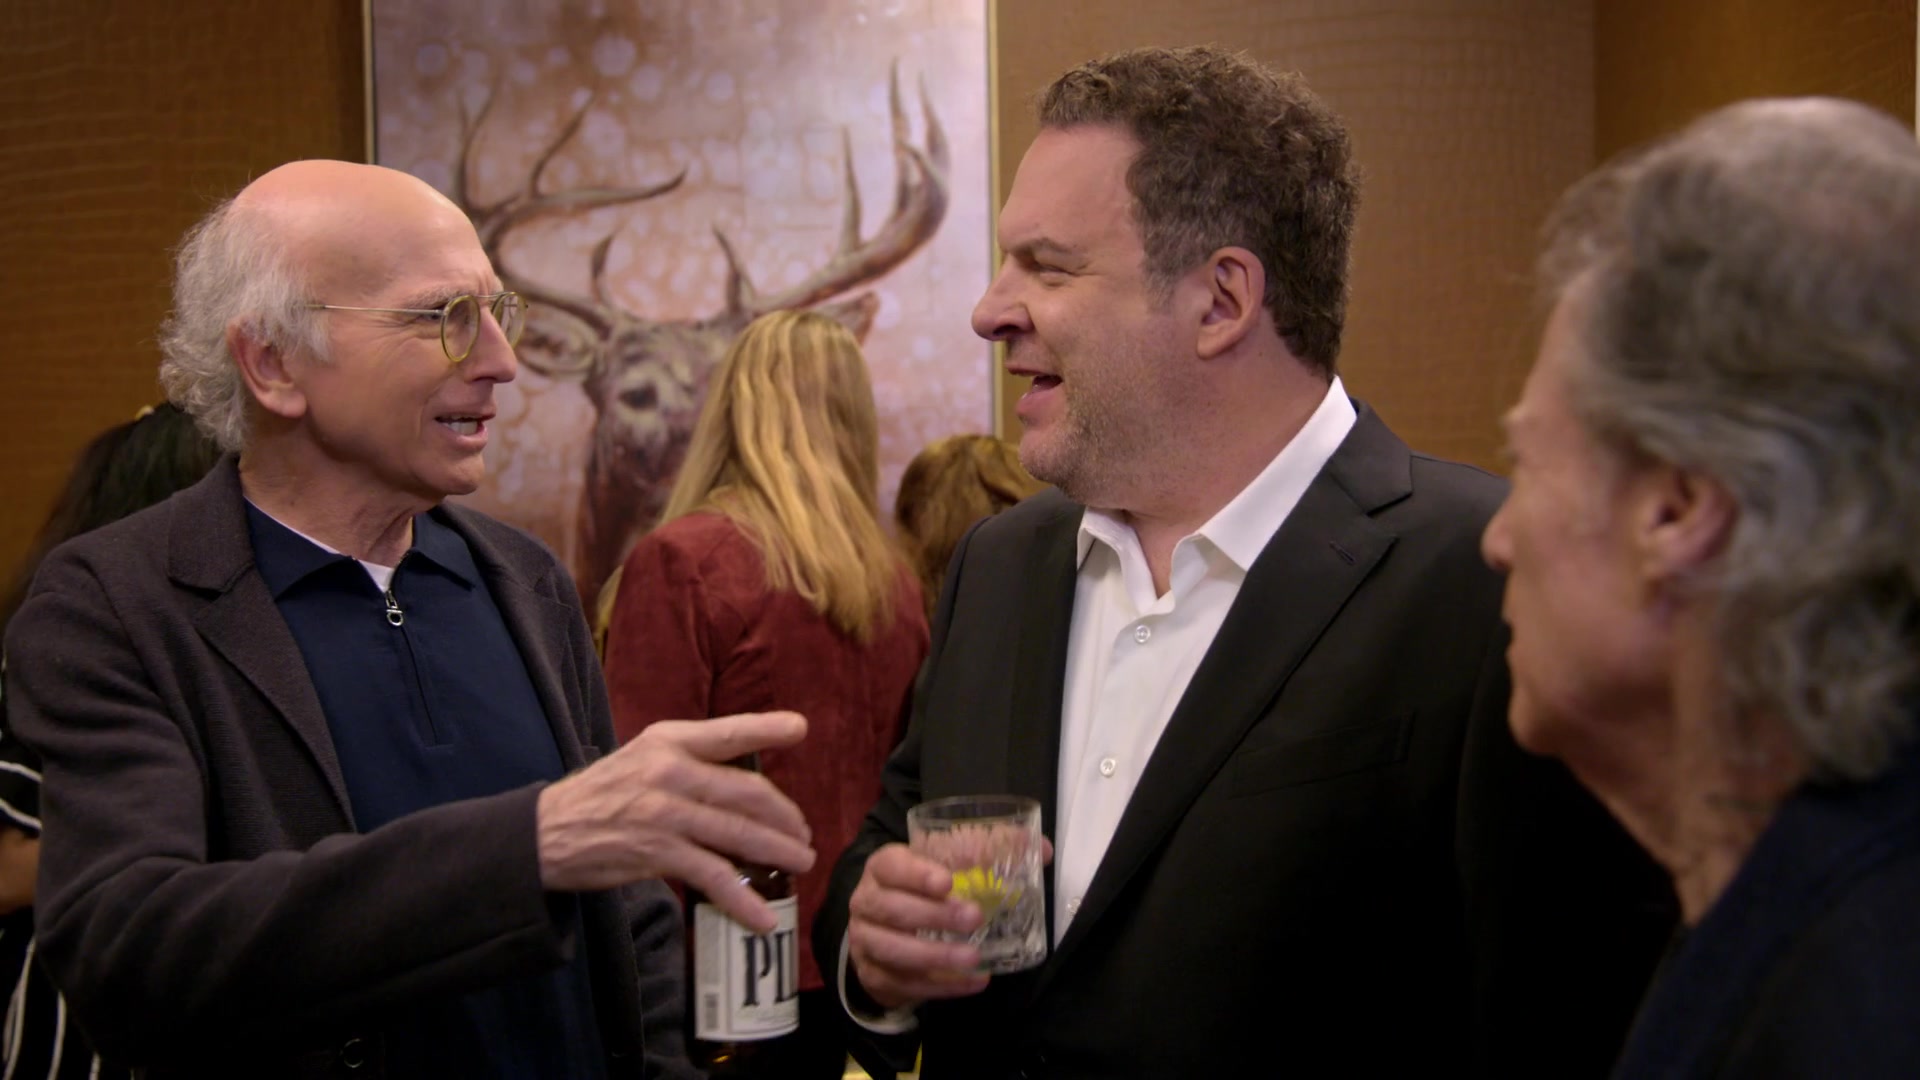 Lagunitas Pils Beer Enjoyed By Larry David In Curb Your Enthusiasm